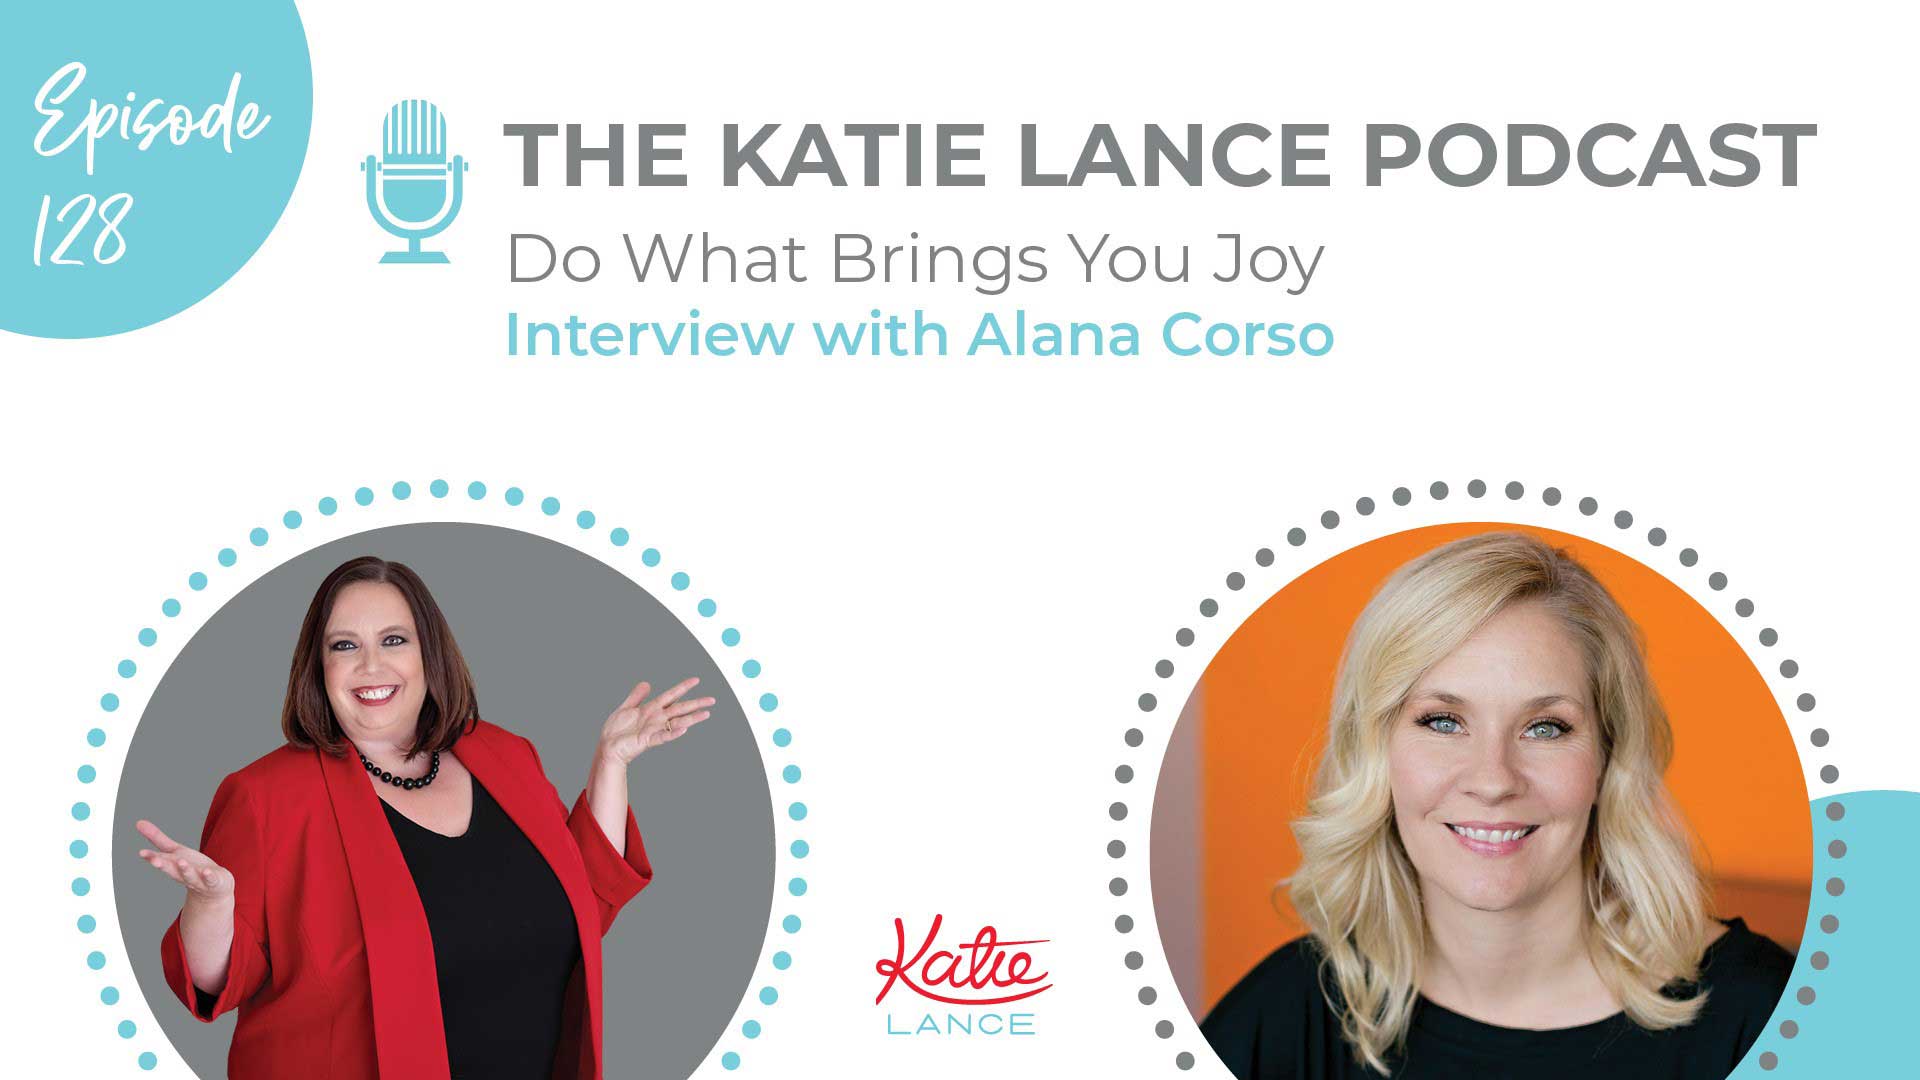 The Katie Lance Podcast - Do What Brings You Joy